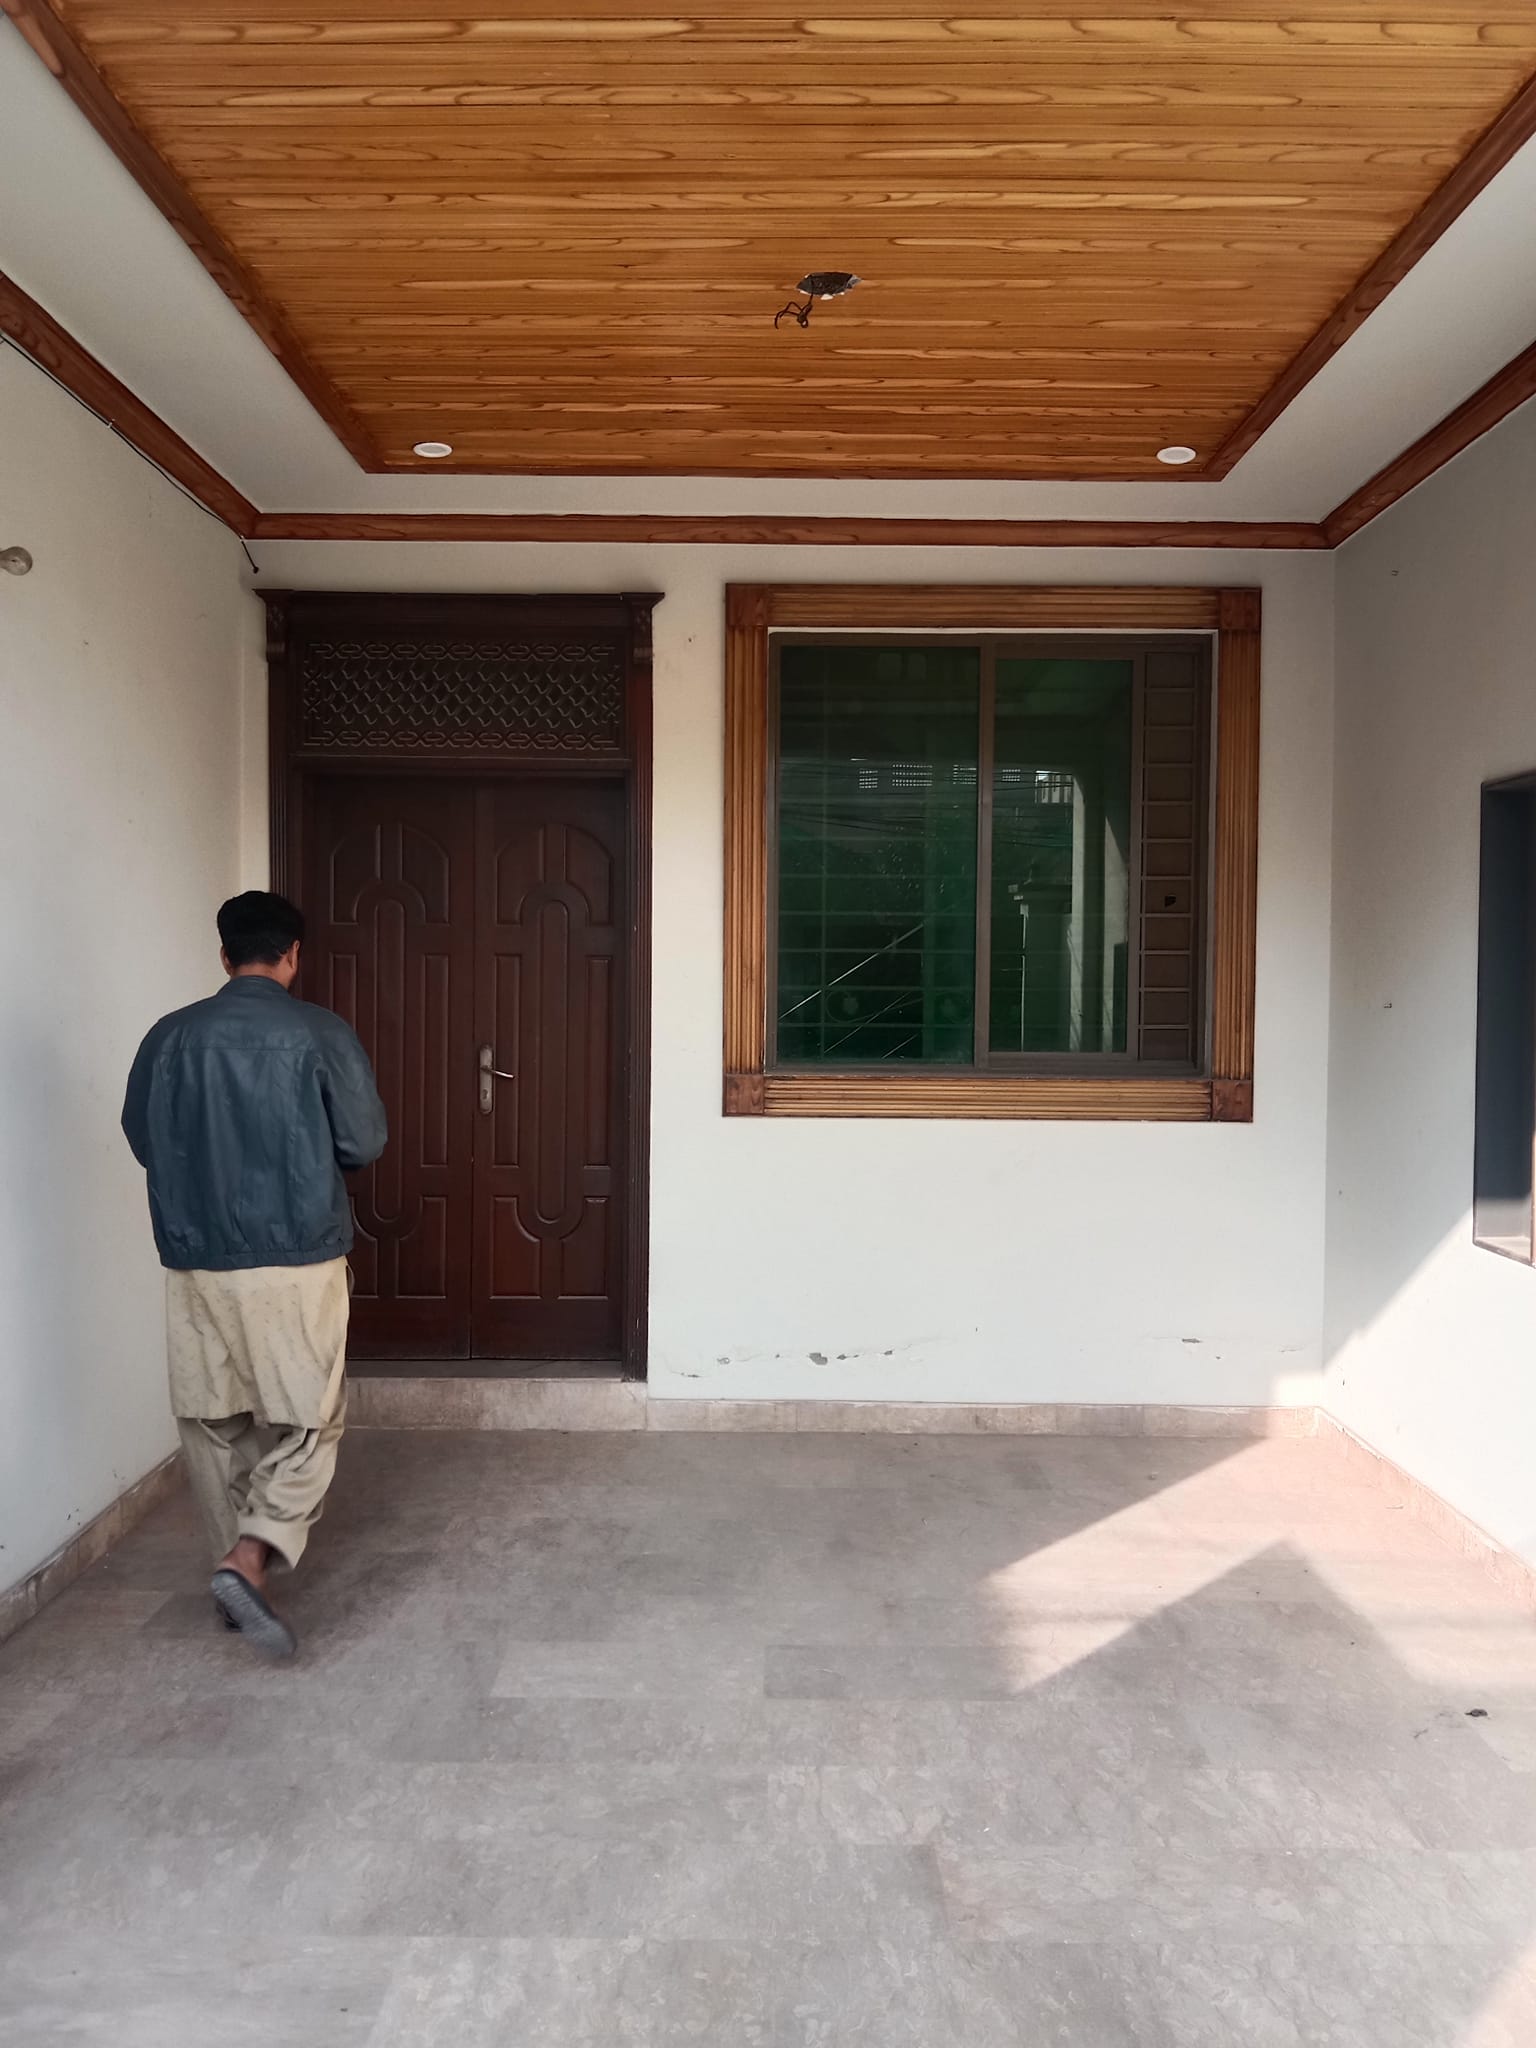 5 Marla House For Rent in Street No 15 Shalimar Colony Multan